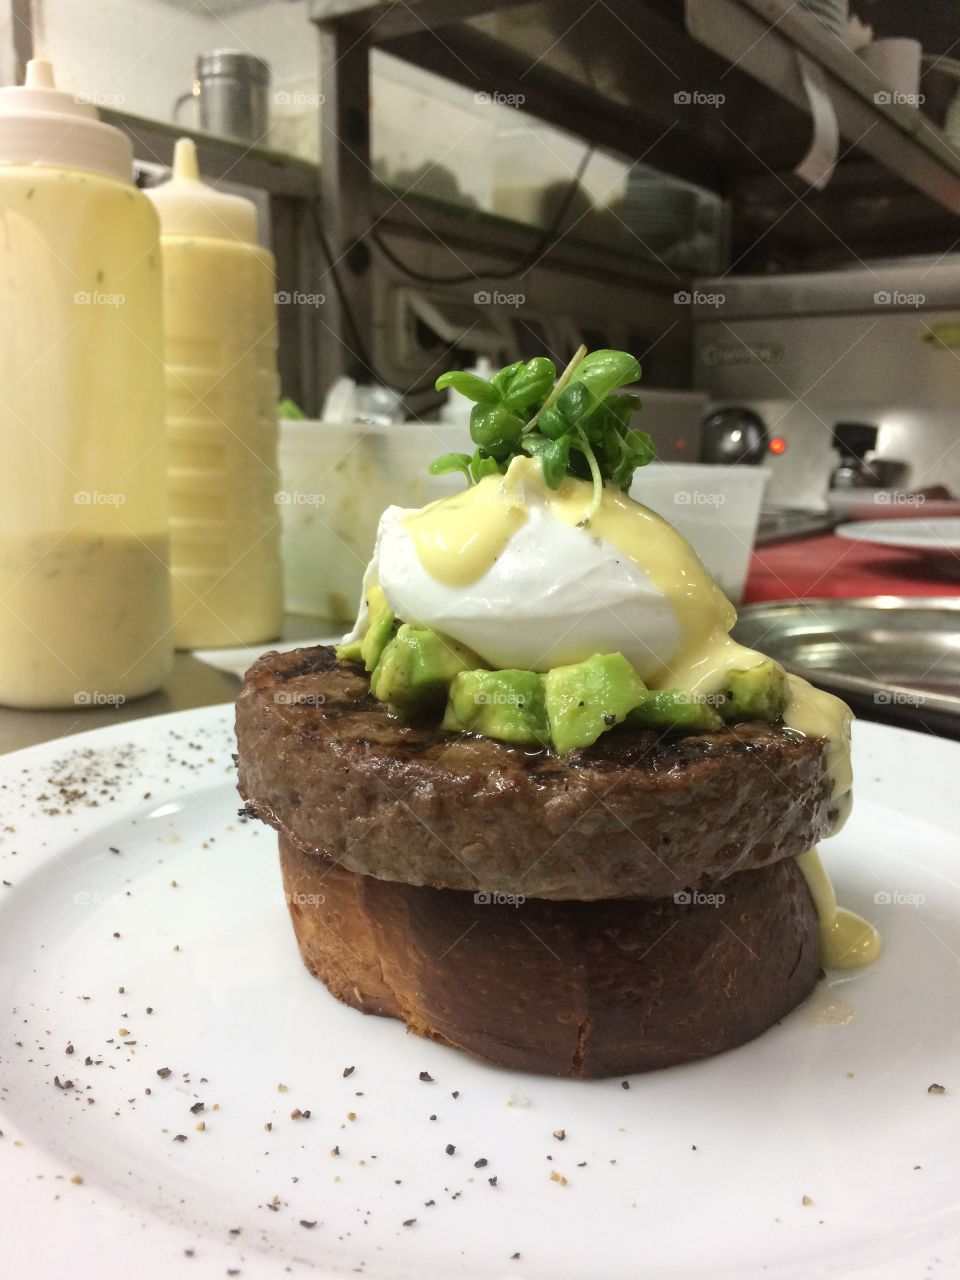 A hamburger in an interesting offer on a crispy toasted loaf, with an egg in a well-known version with pieces of marinated avocado.